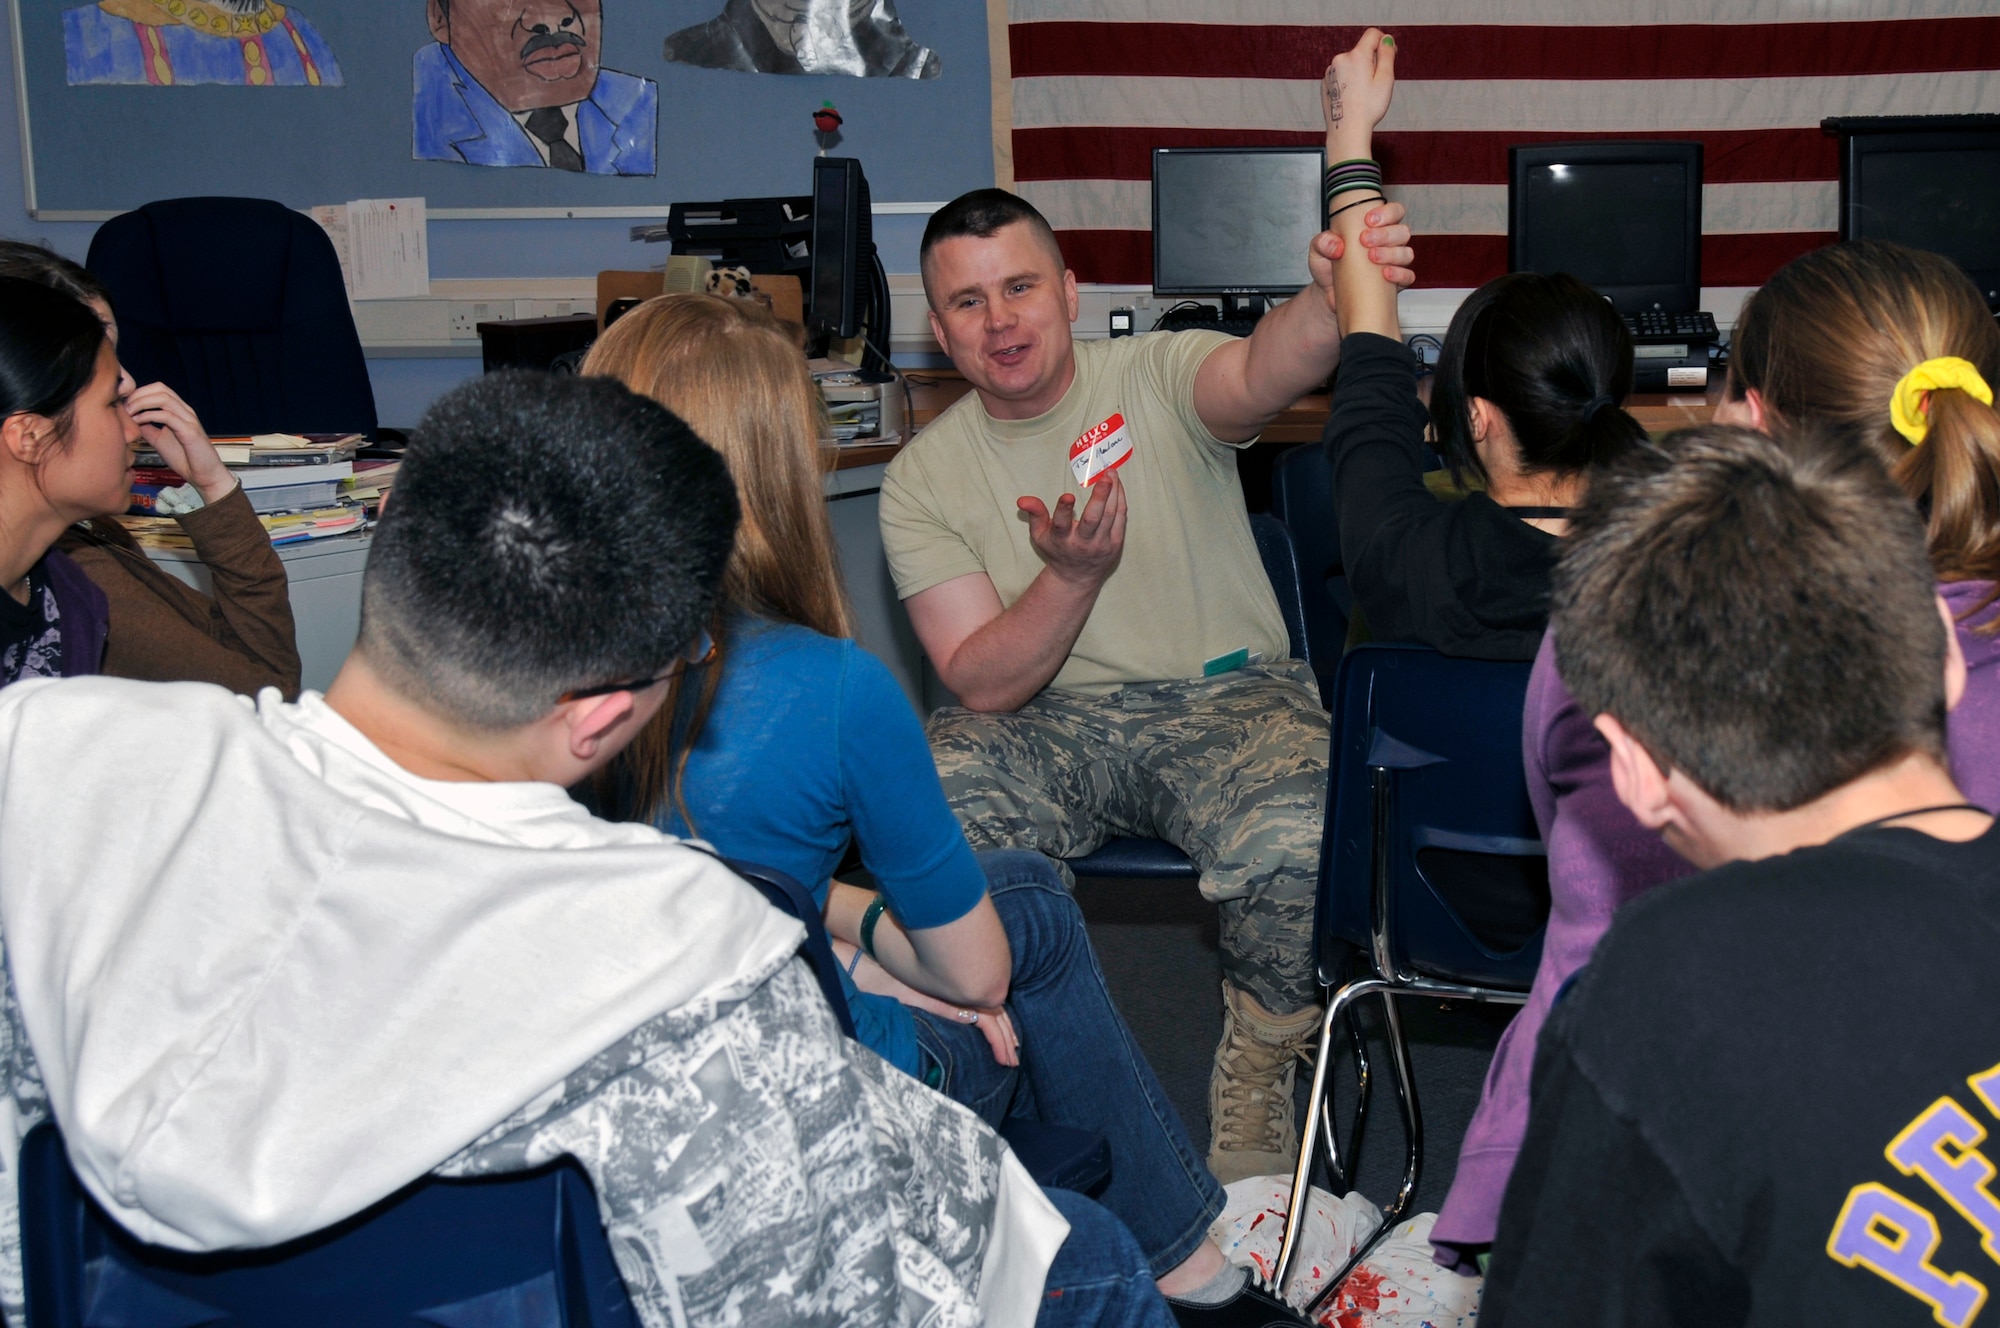 Tech Sgt. Victor Malone, 48th Medical Group NCO in charge of clinical education, briefs 8th graders on first responder techniques March 23, 2009 at RAF Feltwell, England. 48th Medical Group airmen visited the Lakenheath Middle School and briefed 8th graders on the dangers of drugs and alcohol, the importance of diet and exercise, dental care, coping with stress, and other topics. (U.S. Air Force photo by Airman 1st Class Perry Aston) 